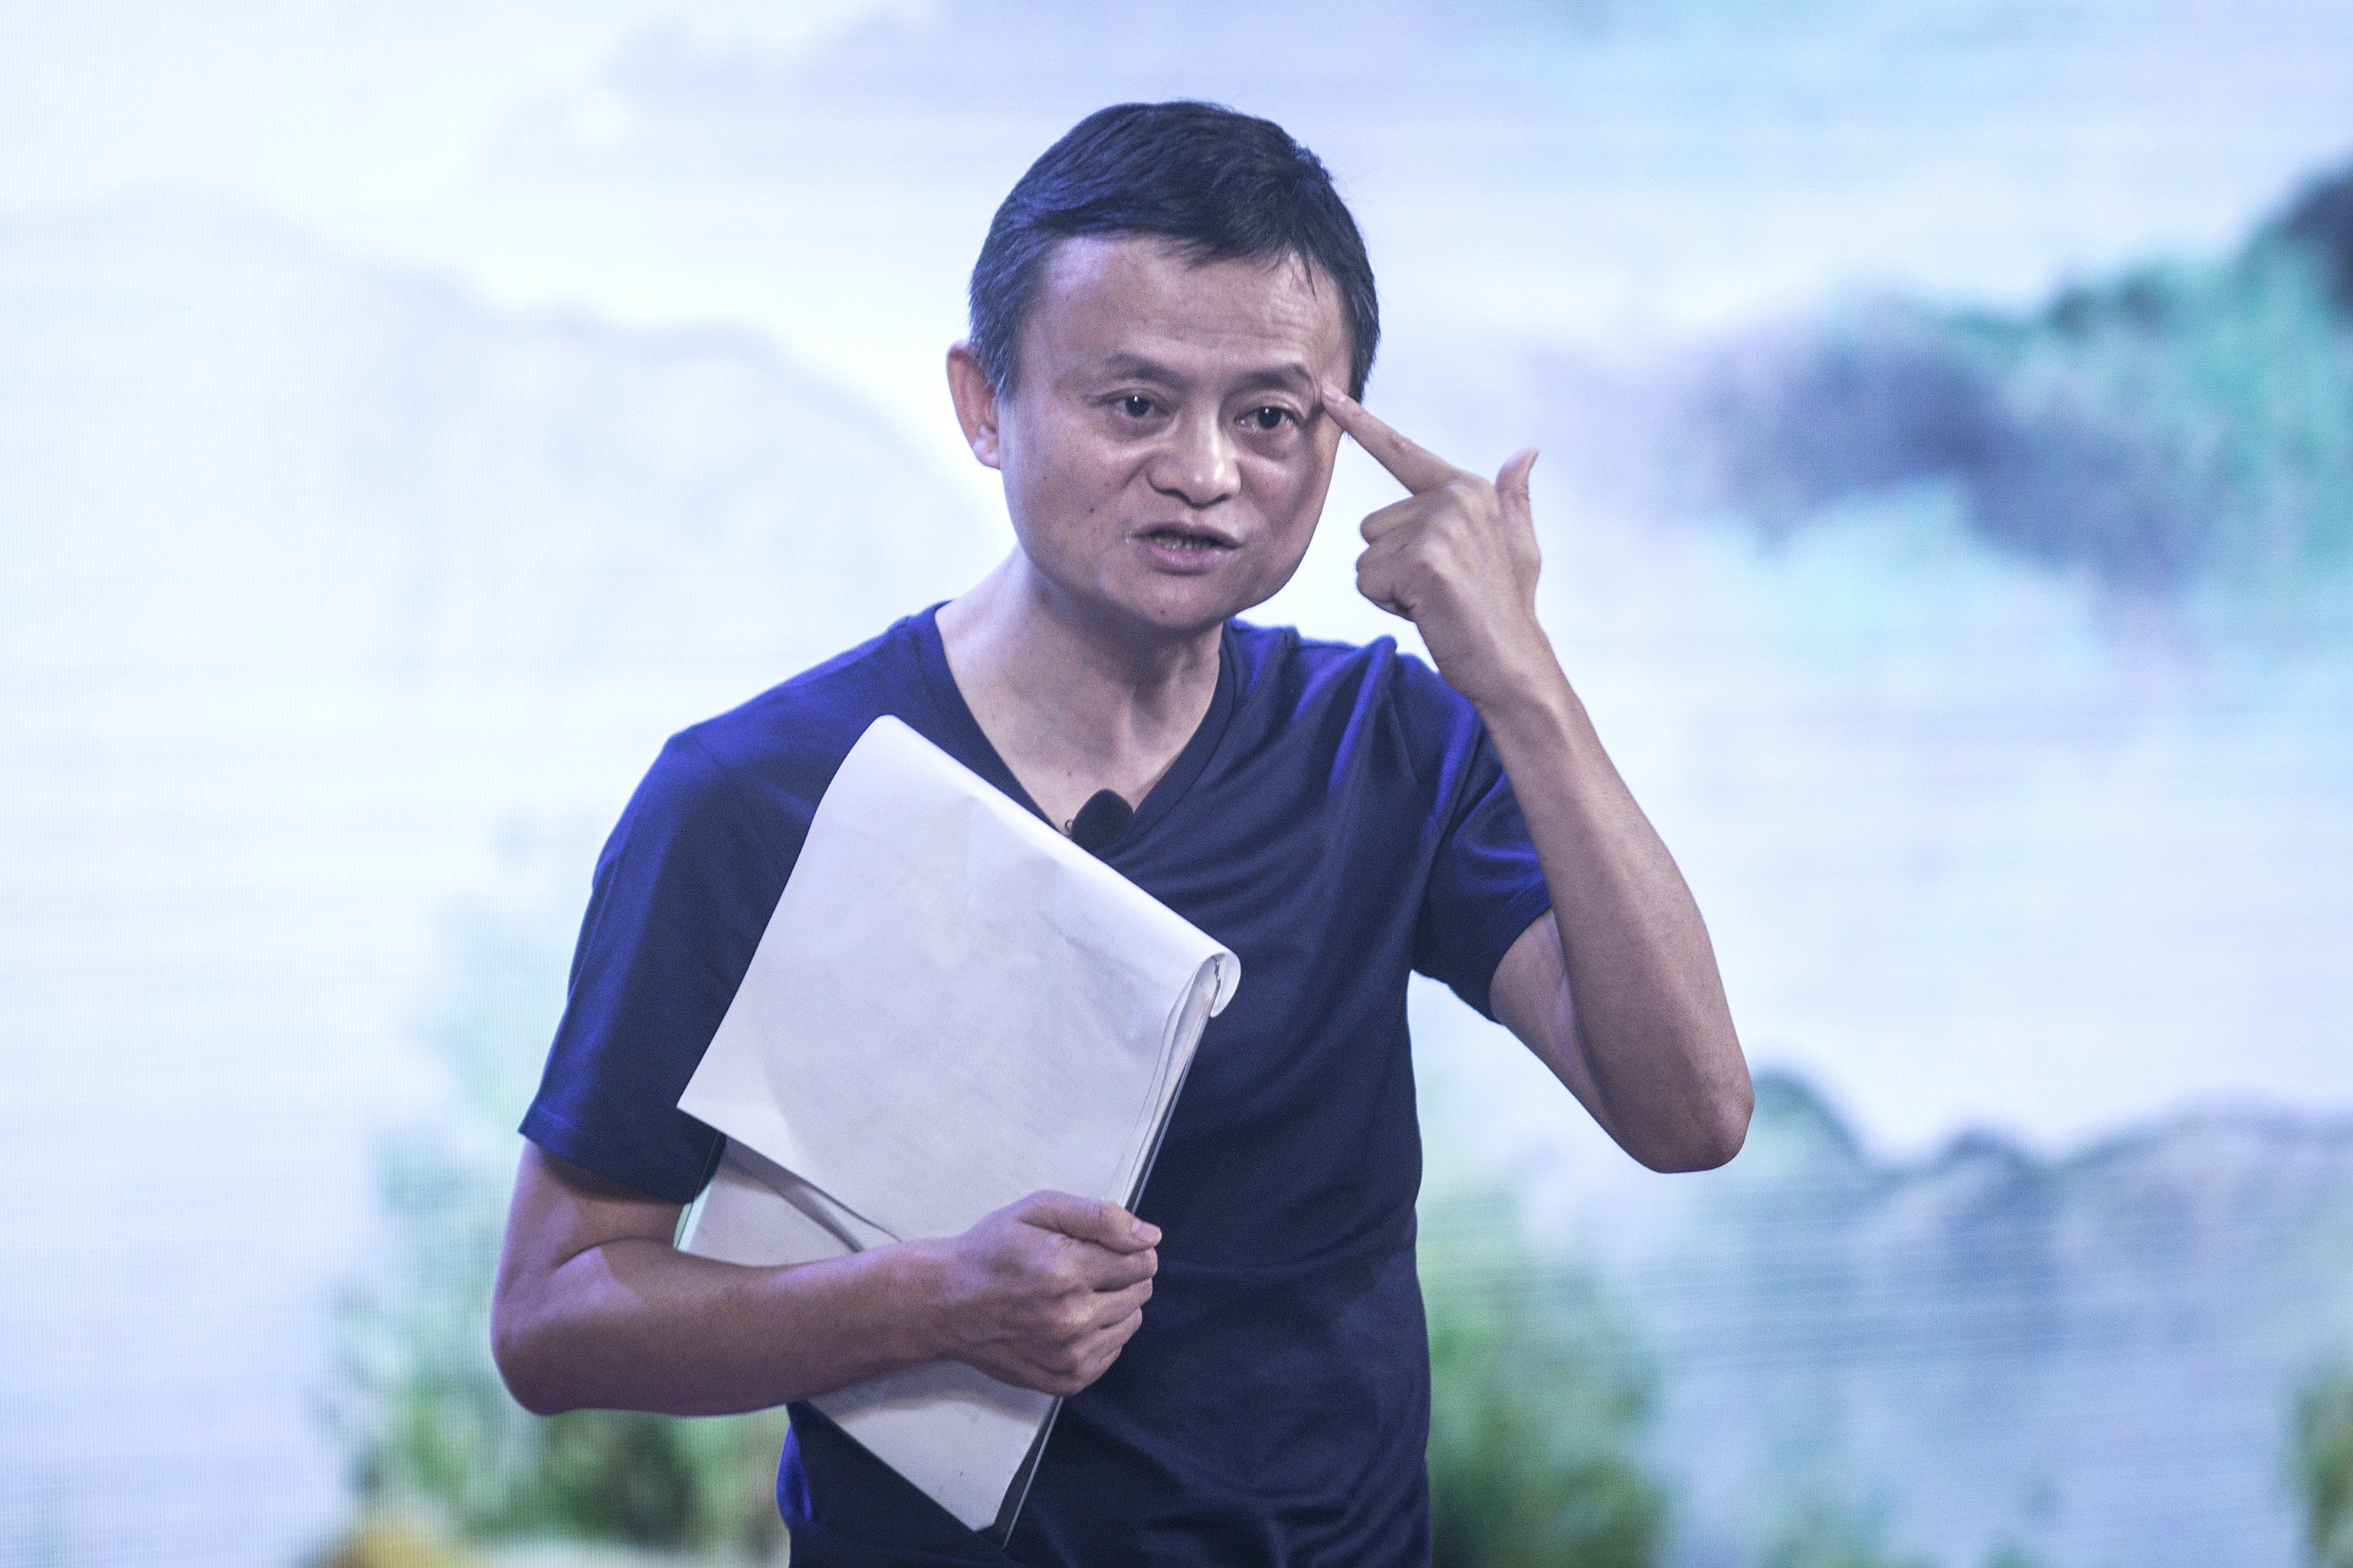 Jack Ma giving a lecture at the gives a speech at the Ò Rural Education Lunch meeting for the Jack Ma Foundation in Sanya, China | Photo: Getty Images